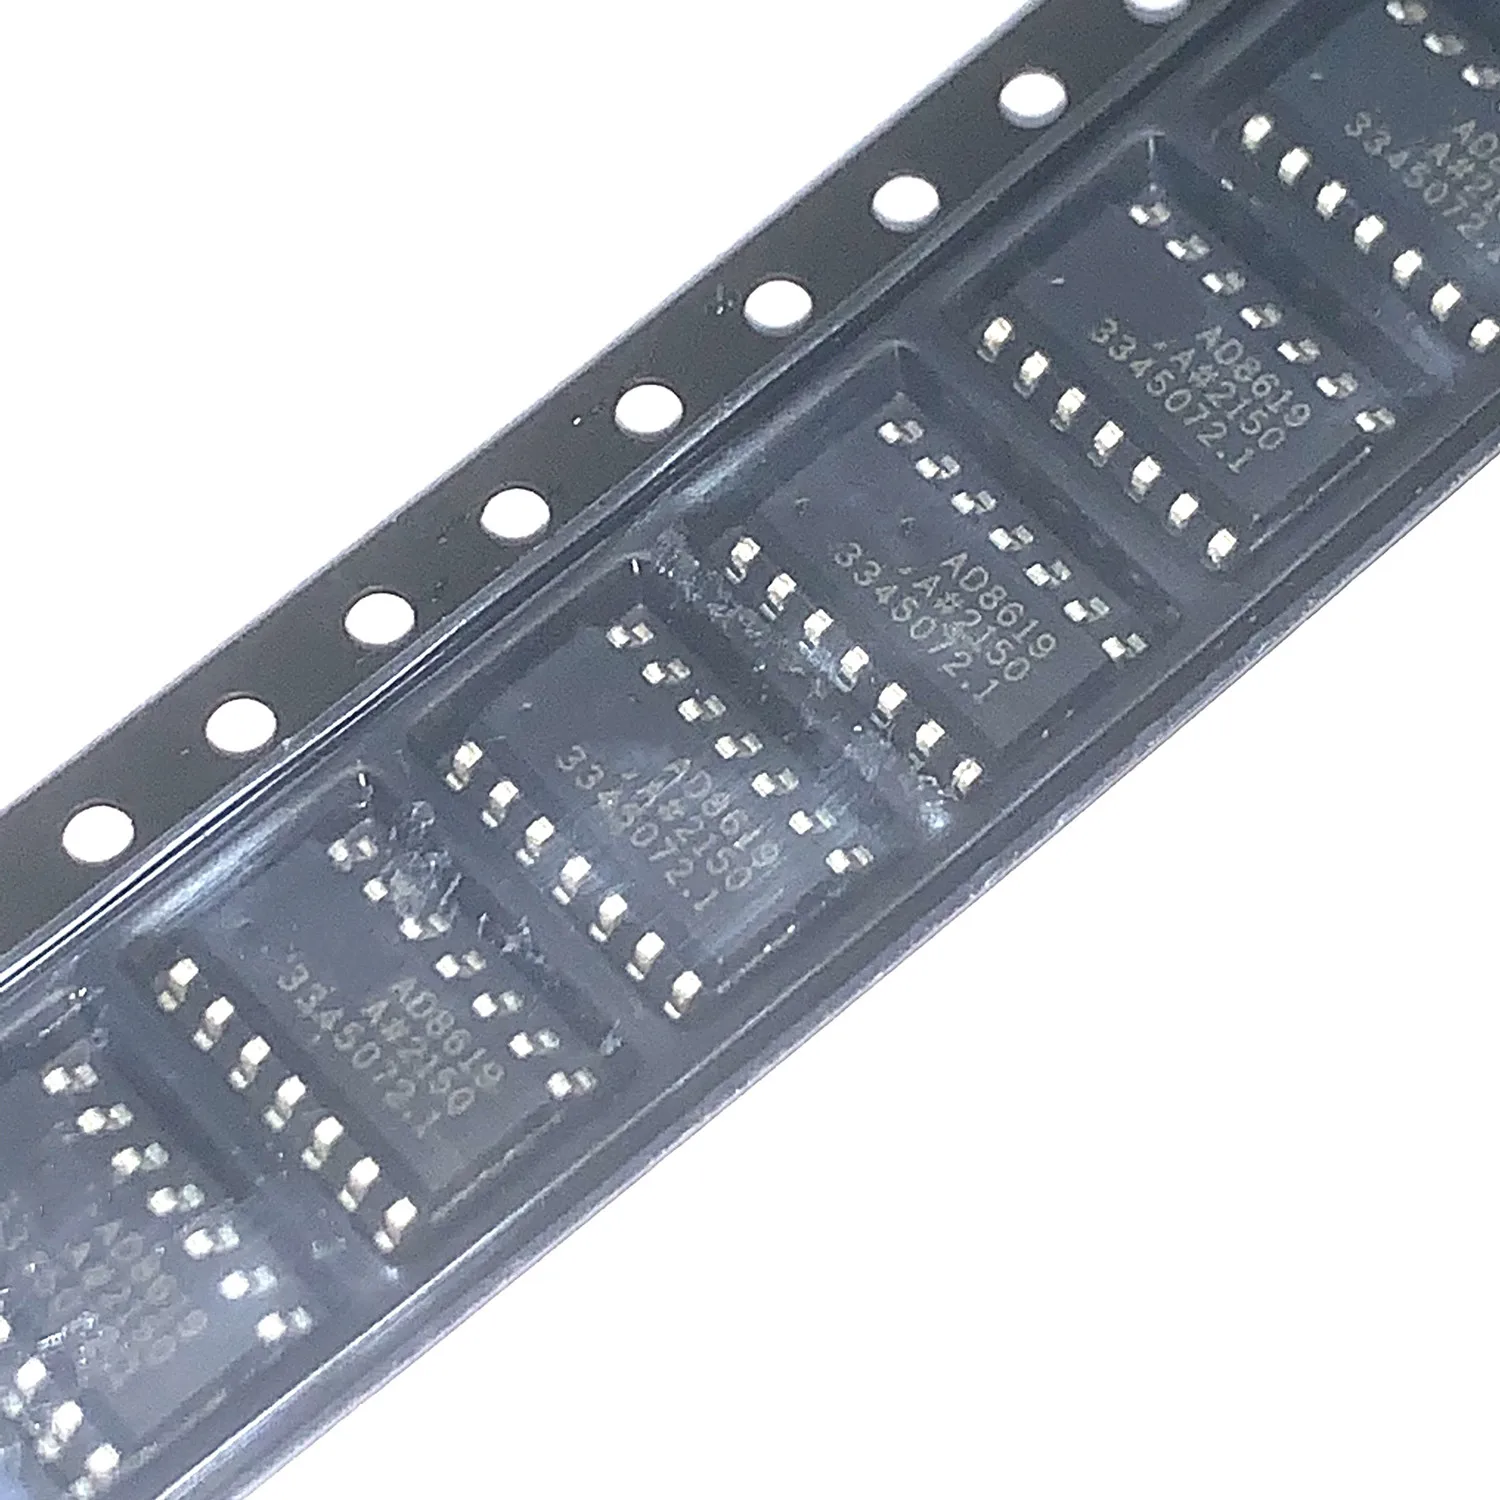 10PCS AD8619ARZ AD8619  SOP14 Low Cost Micropower, Low Noise CMOS Rail-to- Rail, Input/Output Operational Amplifiers